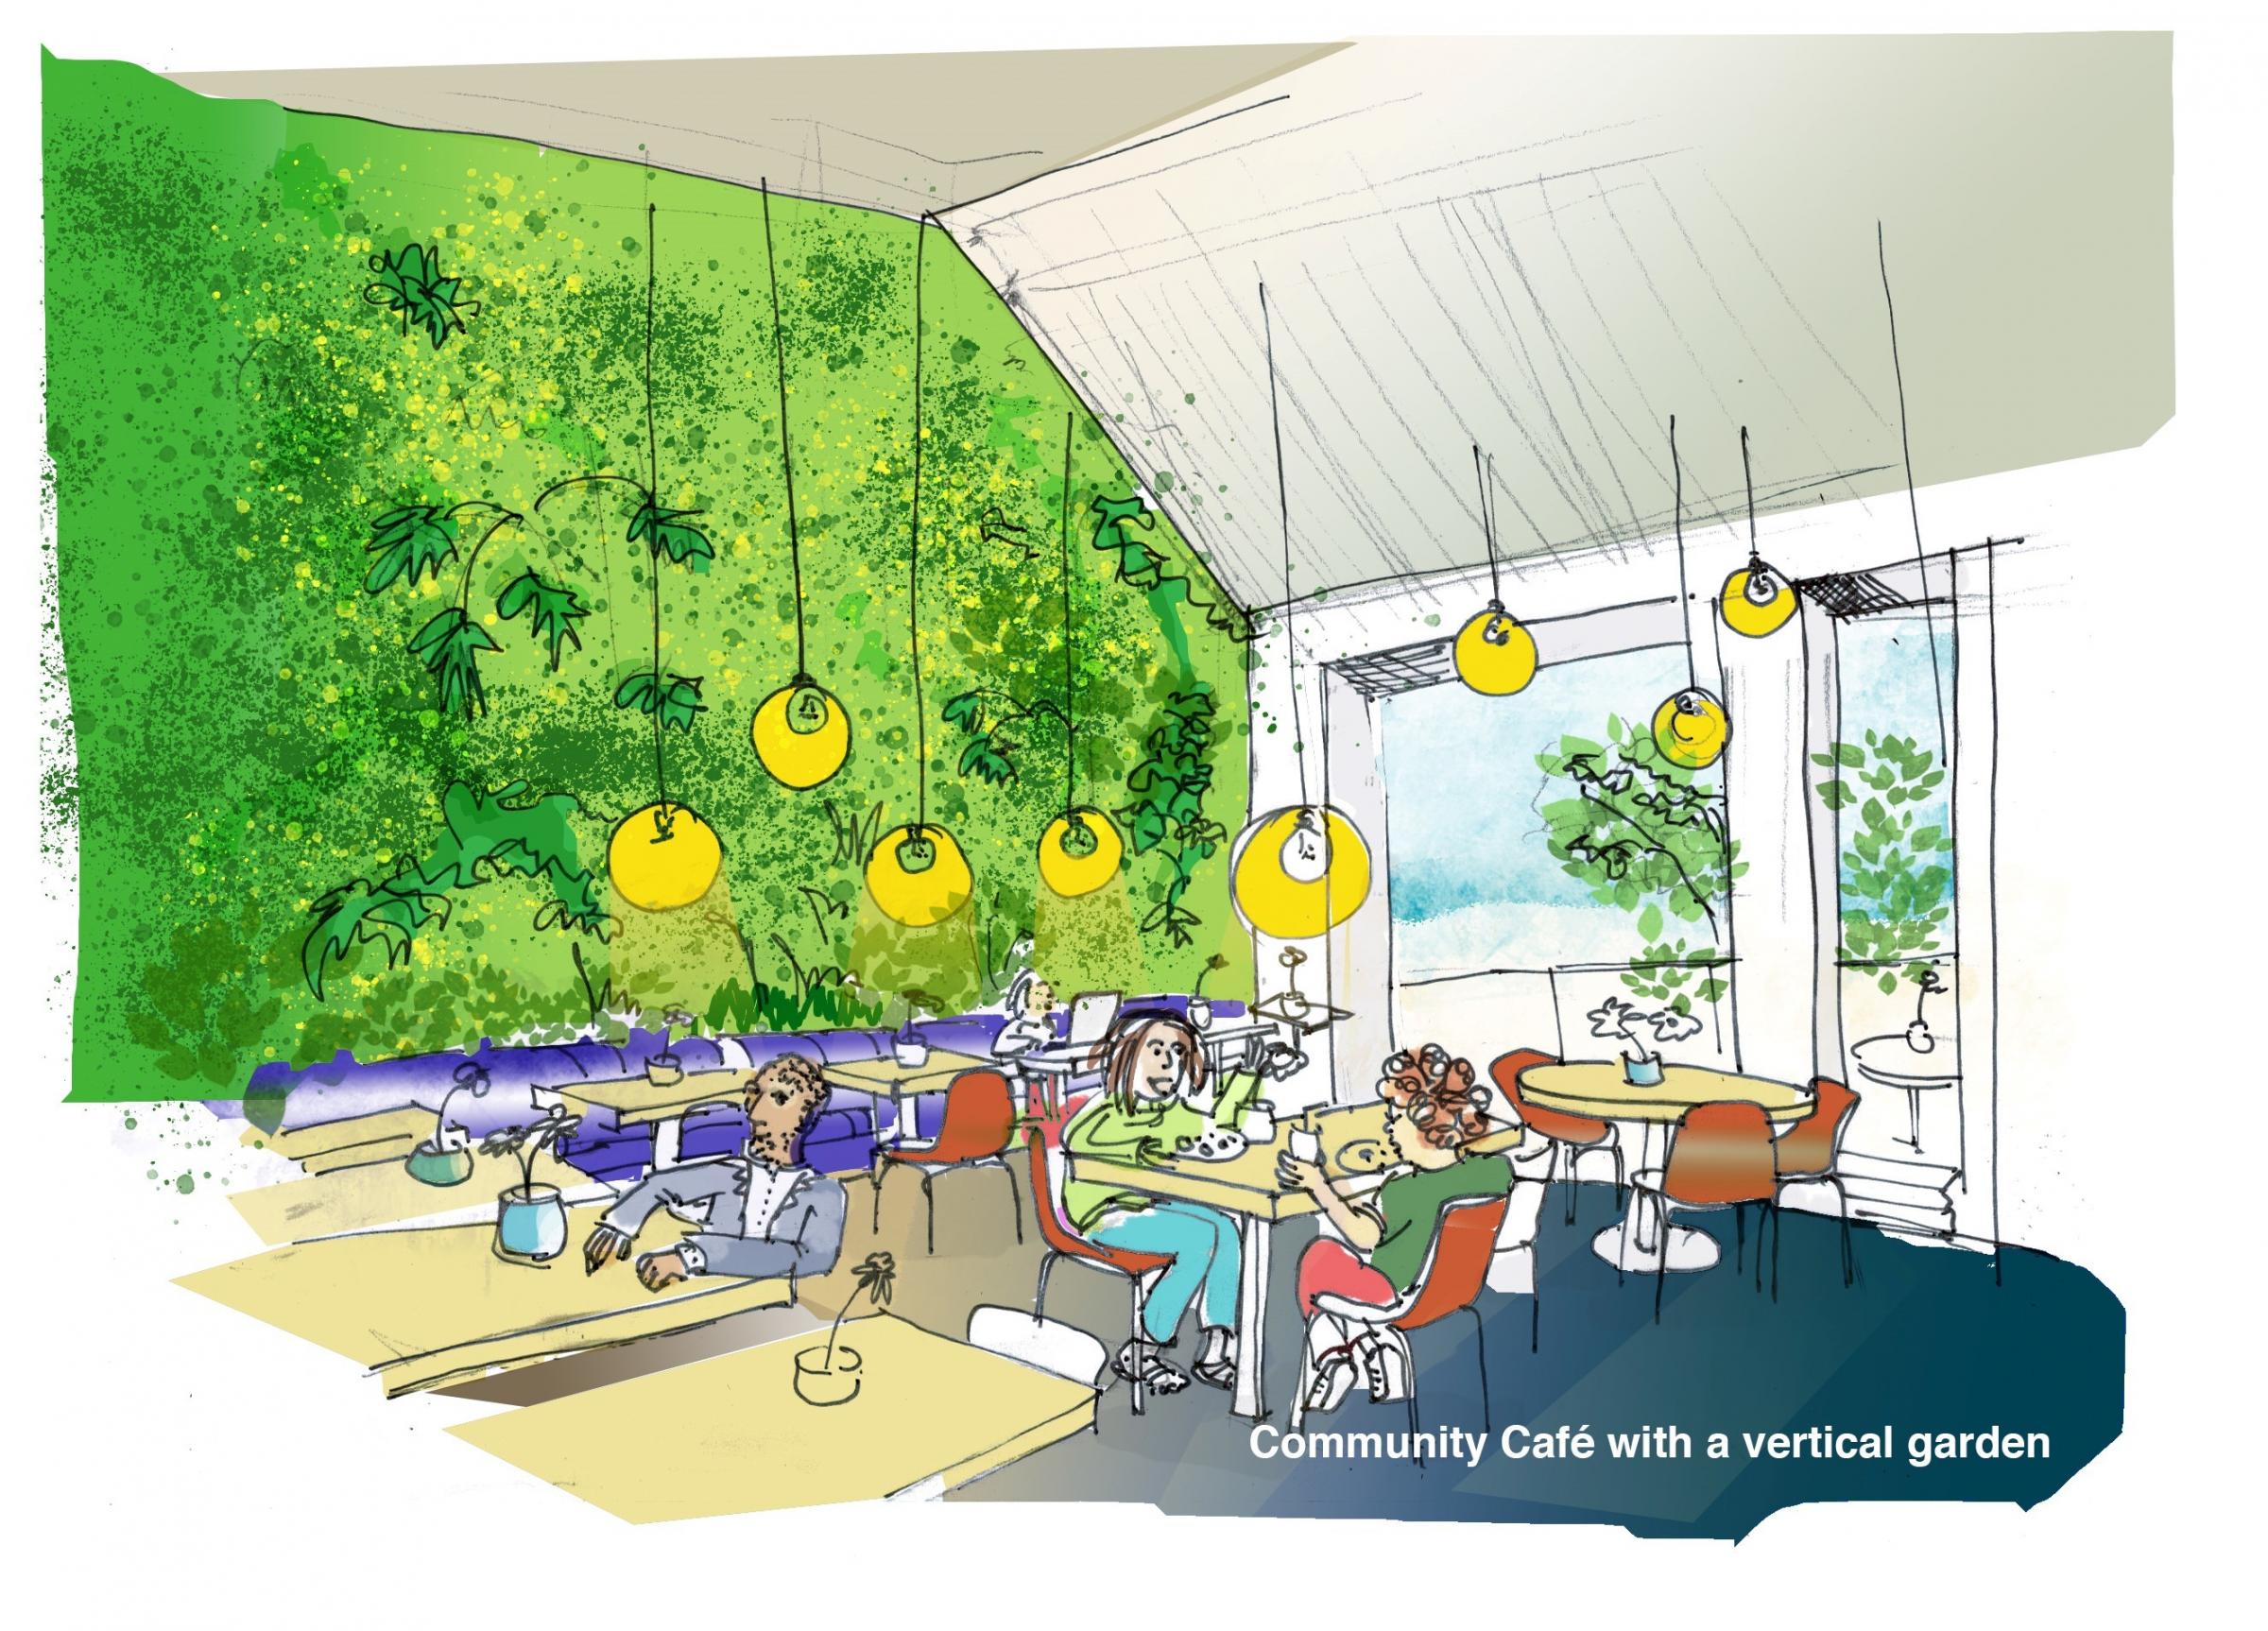 A community cafe with vertical garden is proposed Picture: Asia Grzybowska, Smallwood Architects